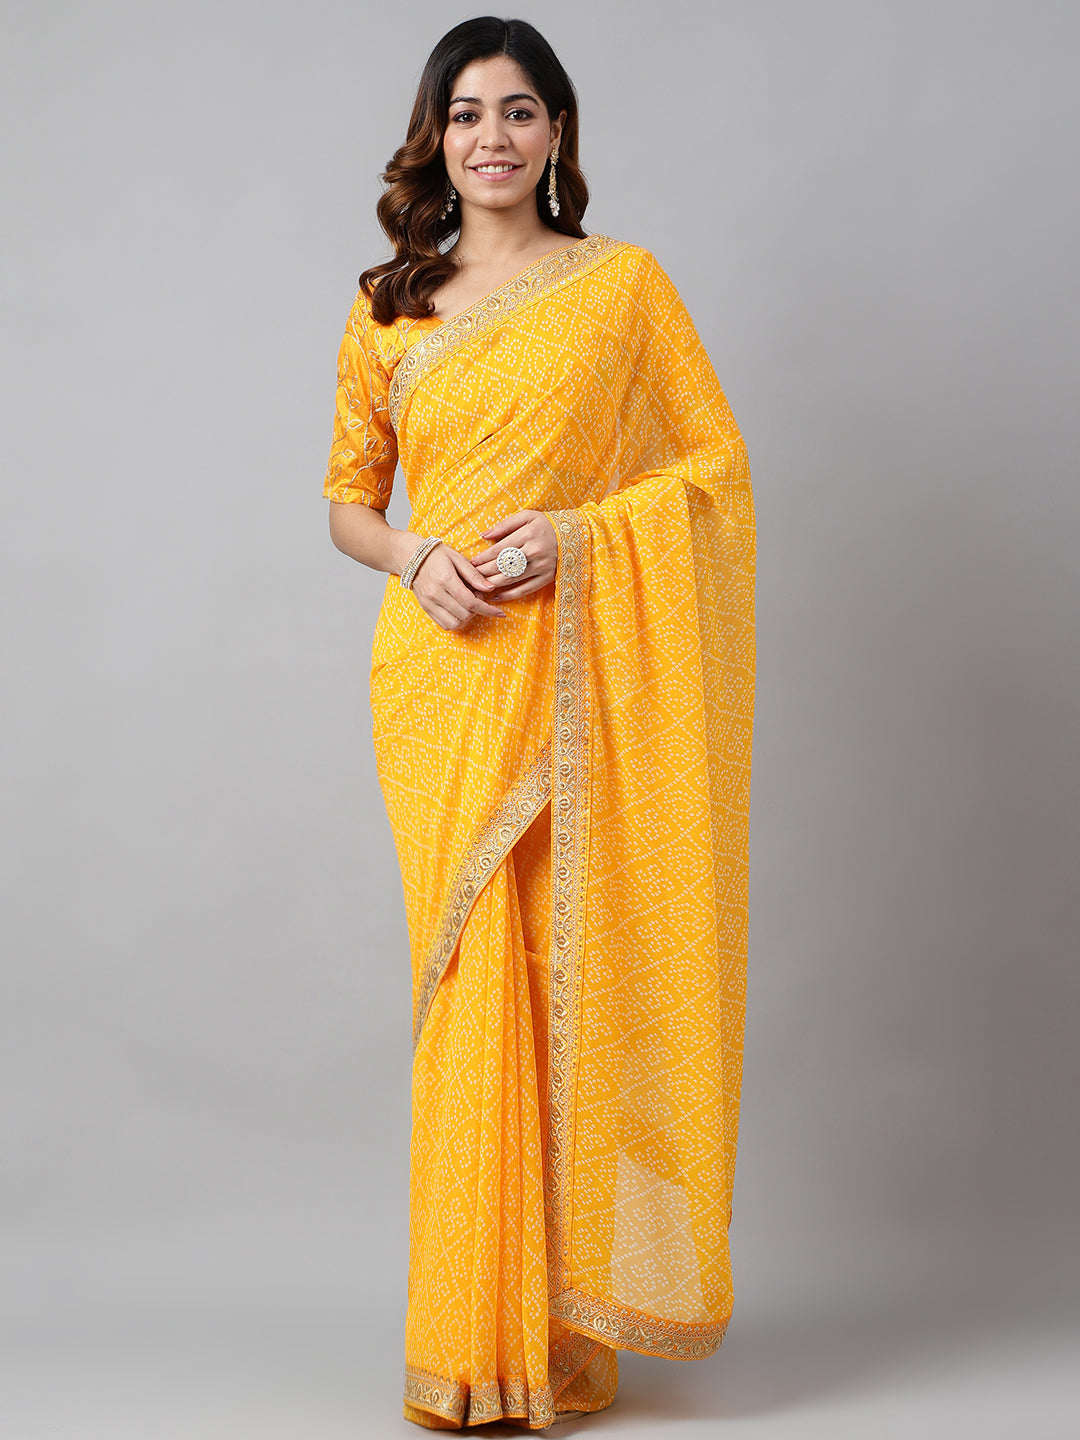 Printed & Embroidery Work In Lace Georgette Mustard Yellow Bandhani Saree For Women